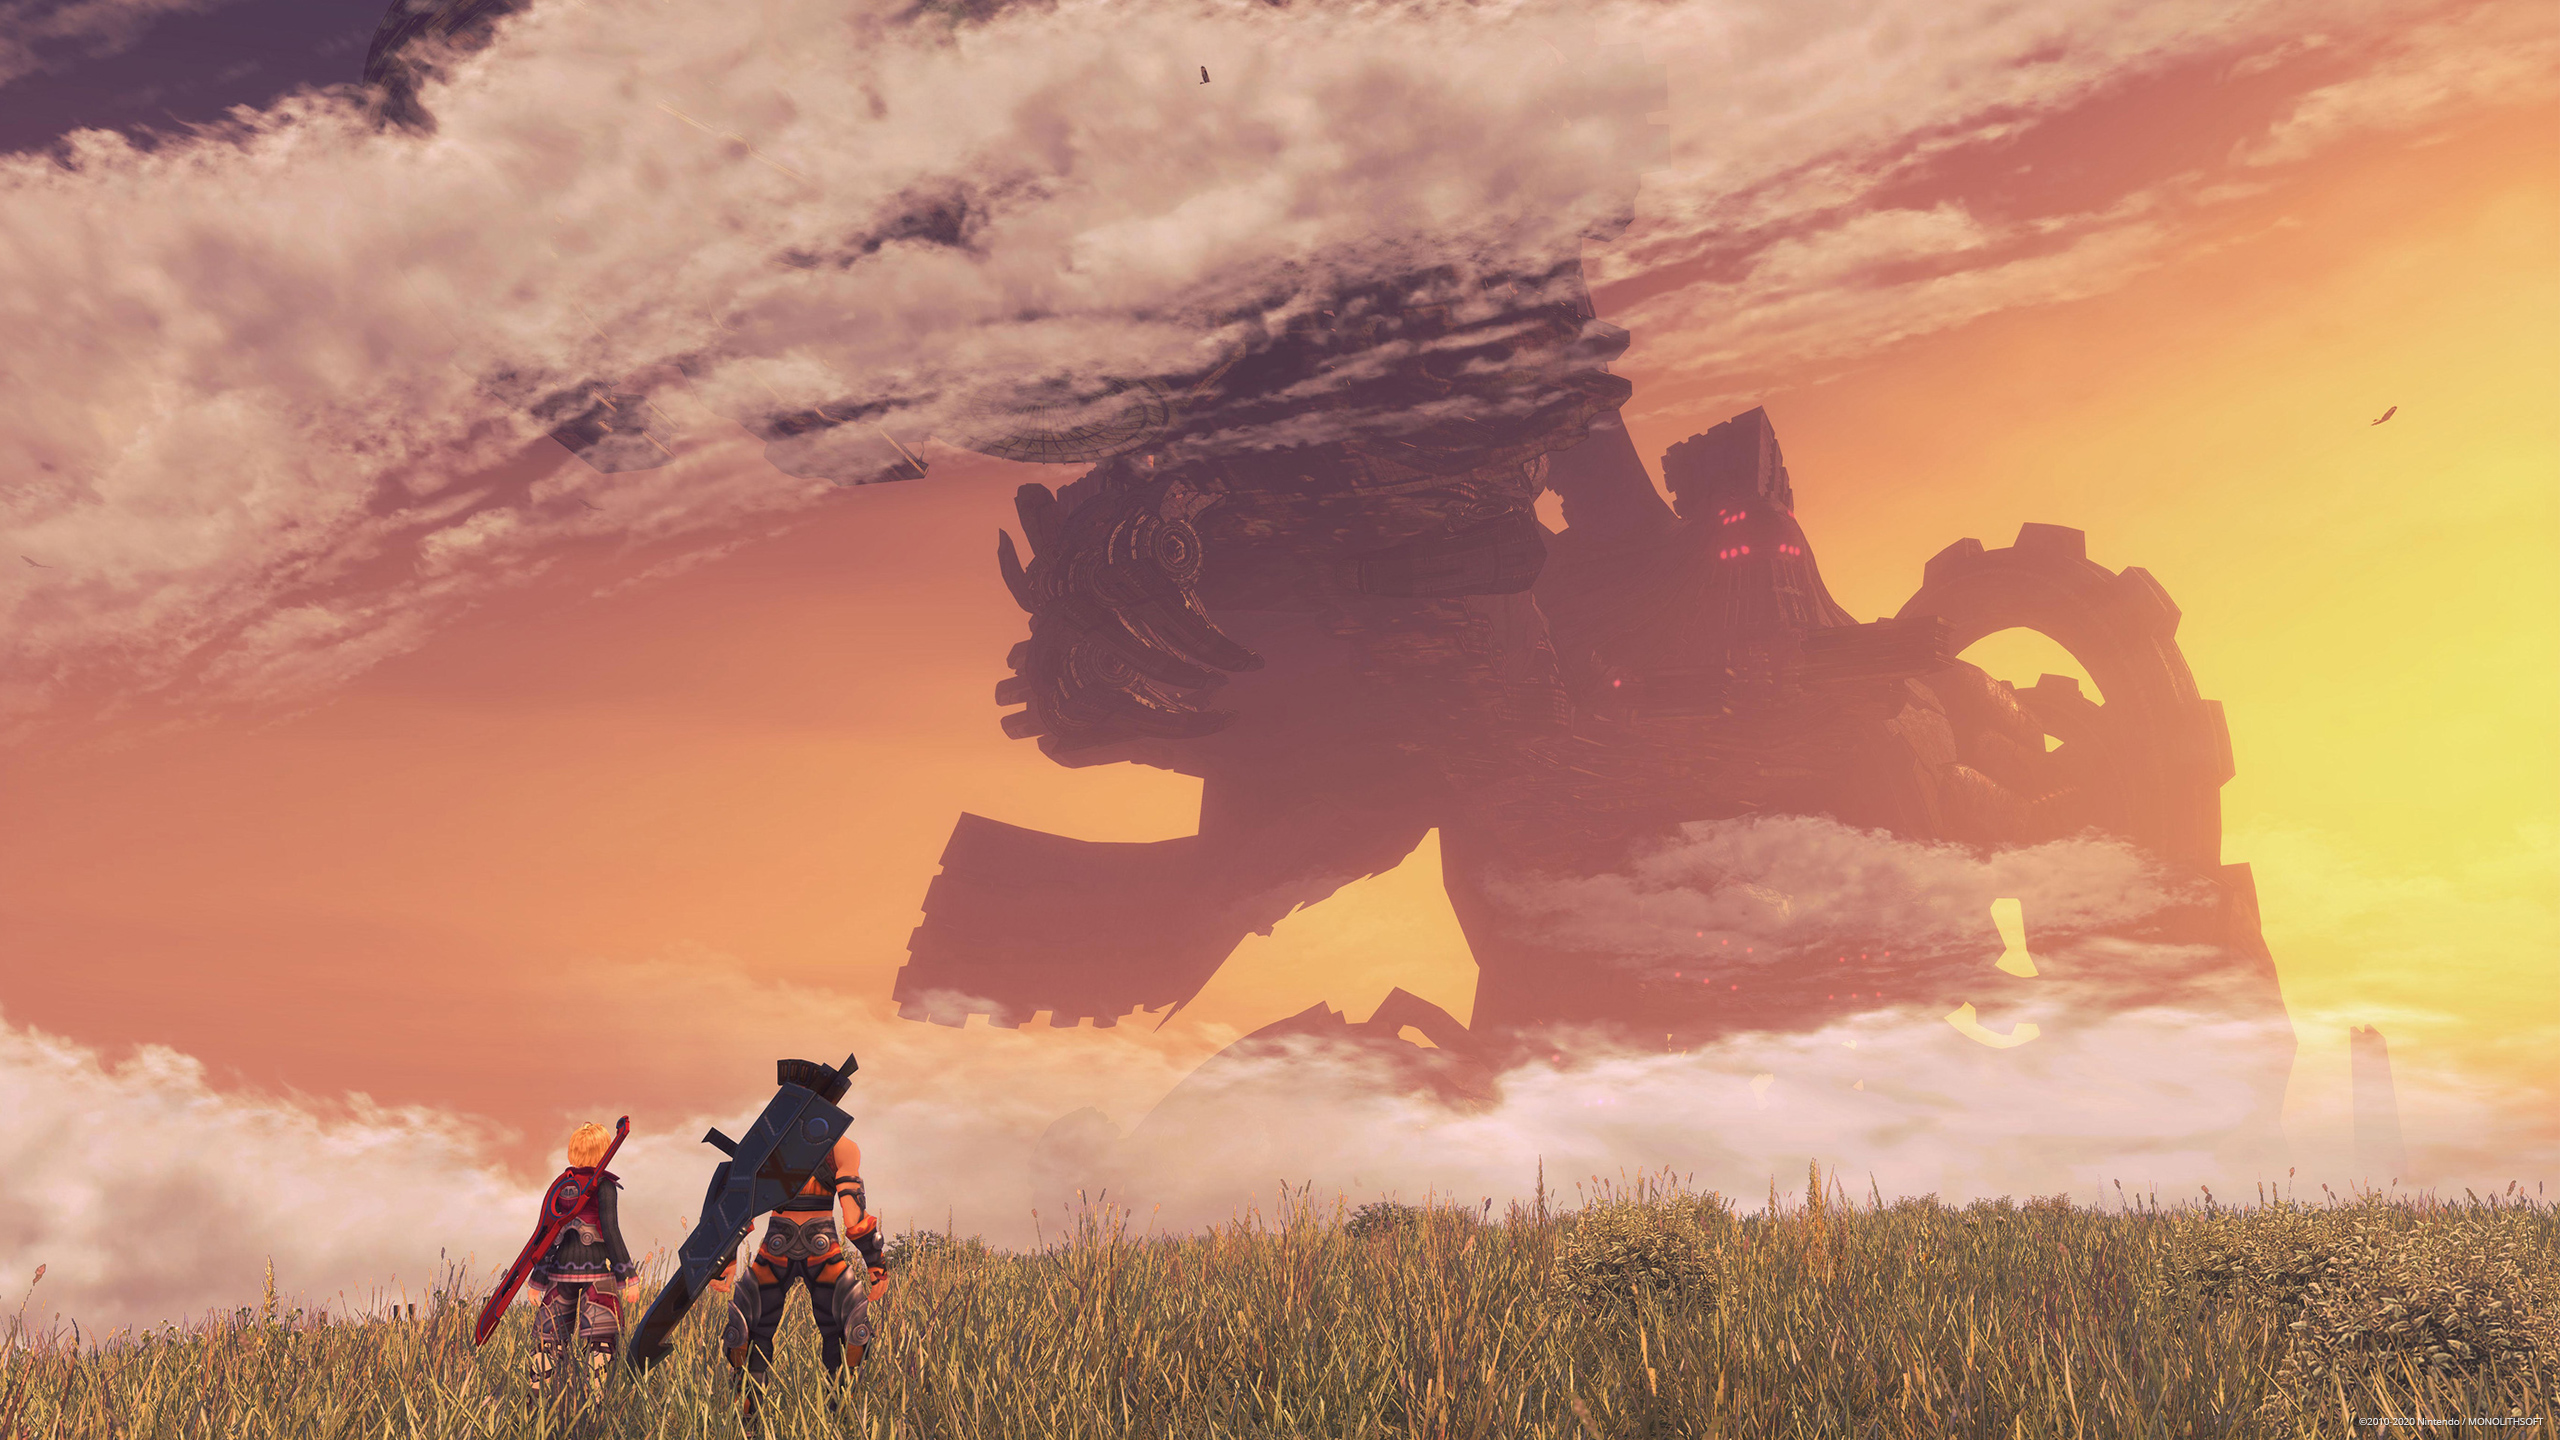 Video Game Xenoblade Chronicles HD Wallpaper | Background Image